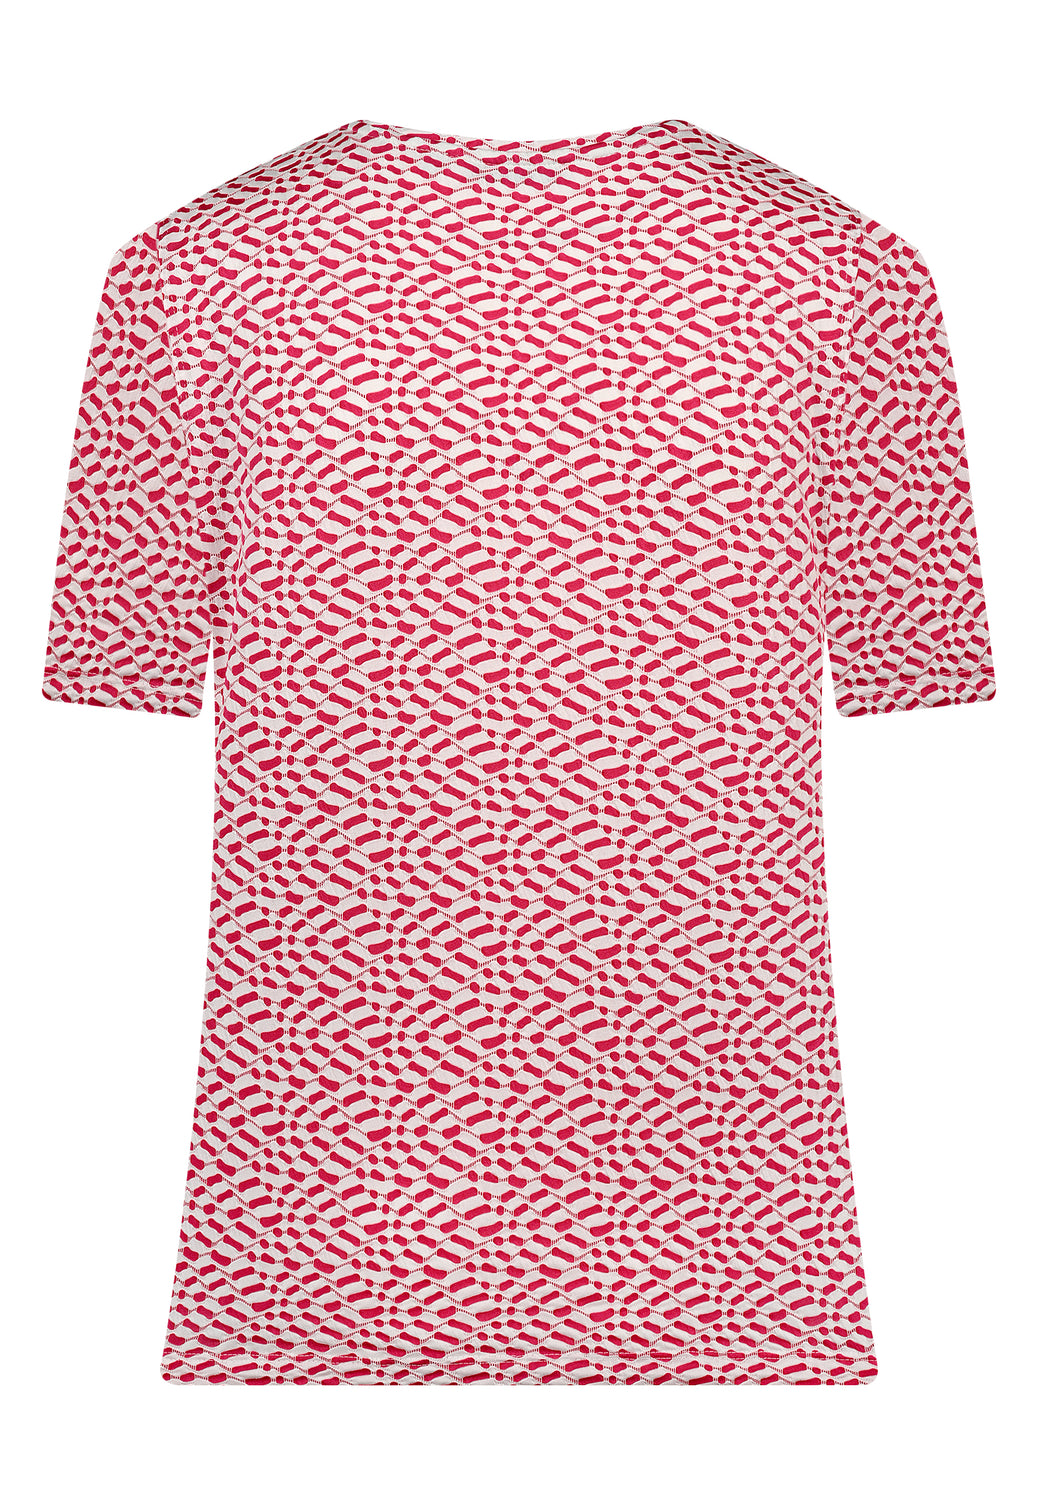 24201 Shirt Structure - 09/pink-white